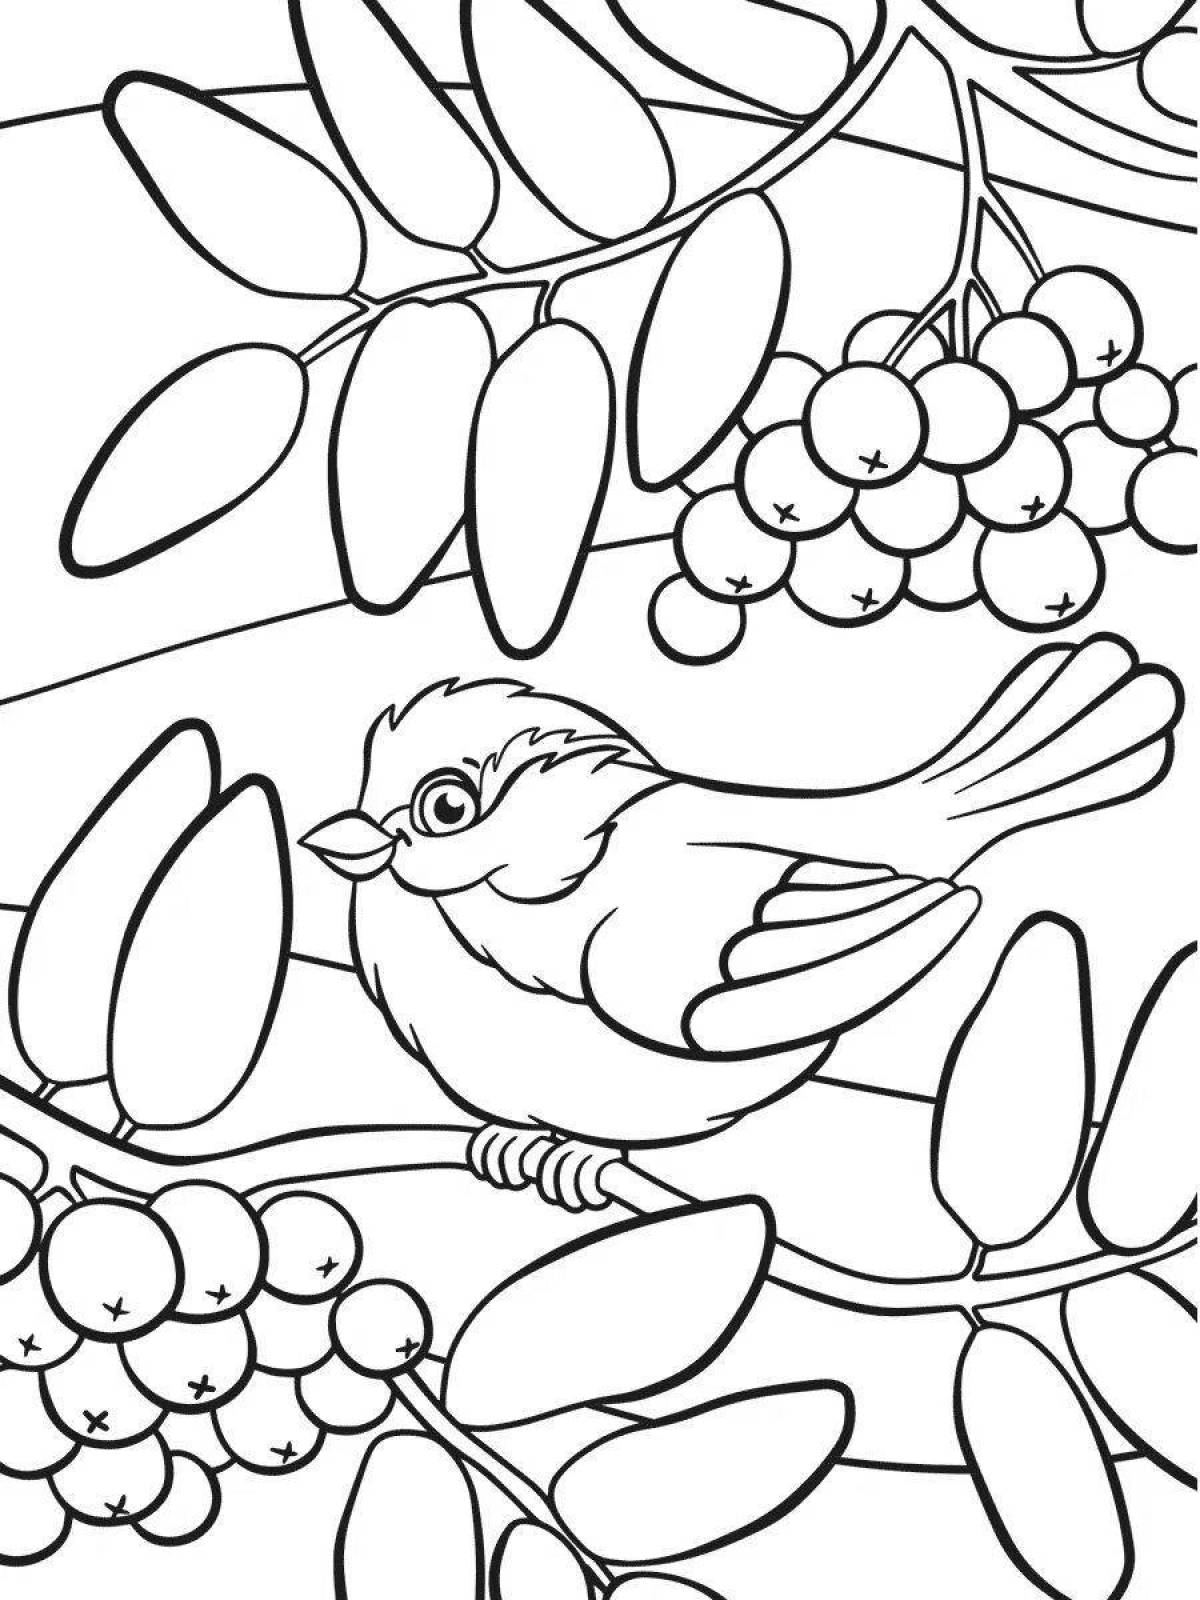 Exquisite tit day coloring book